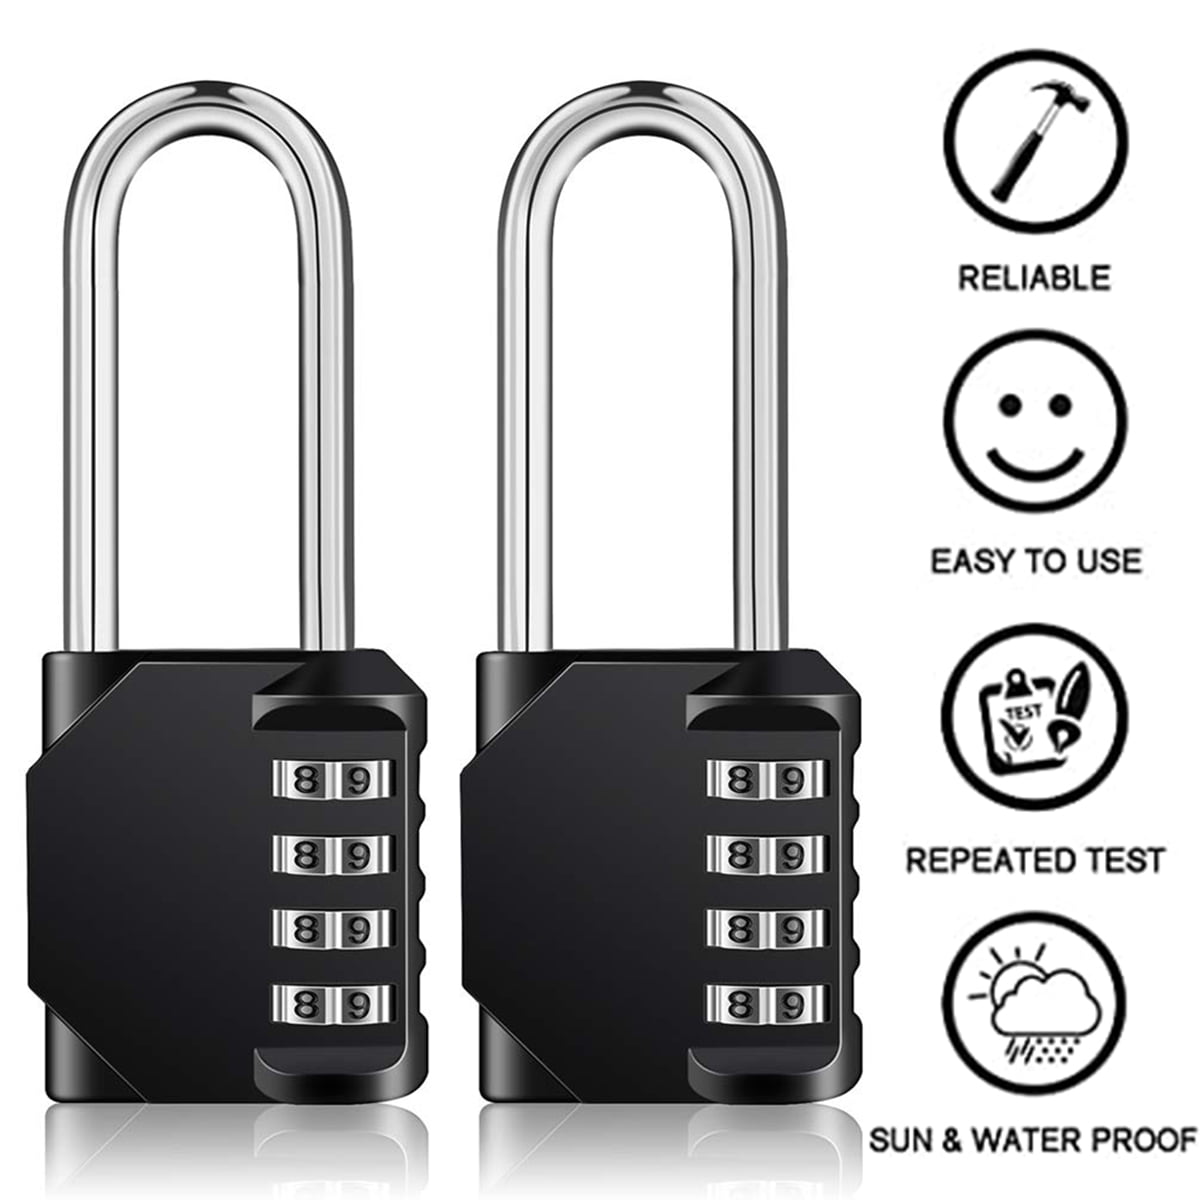 4 Digit Long Shackle Combination Padlock for Gate Shed and Sports Lockers Combination Lock Outdoor Padlock Black,2Pcs Trailers 